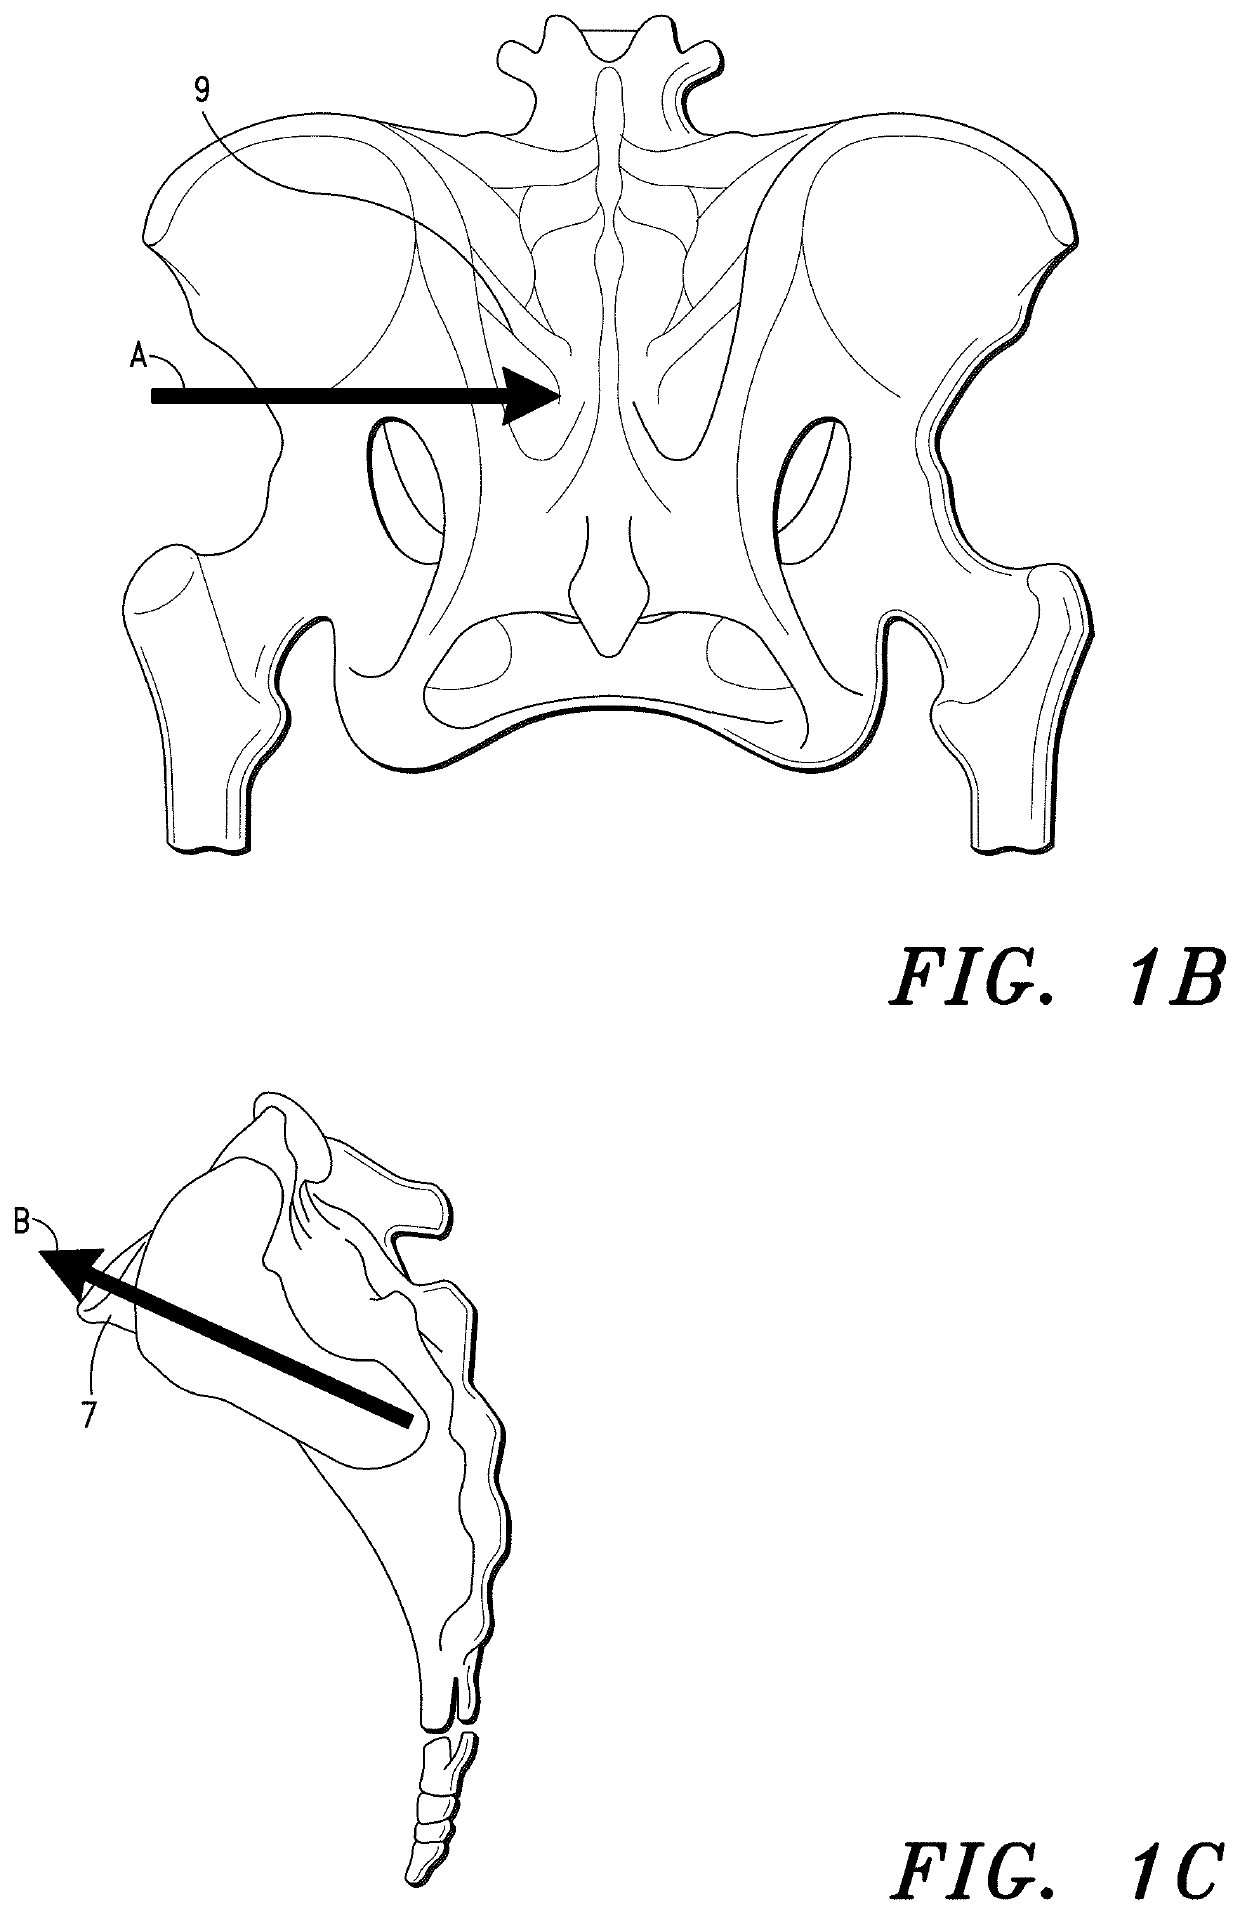 Methods for Sacroiliac Joint Stabilization